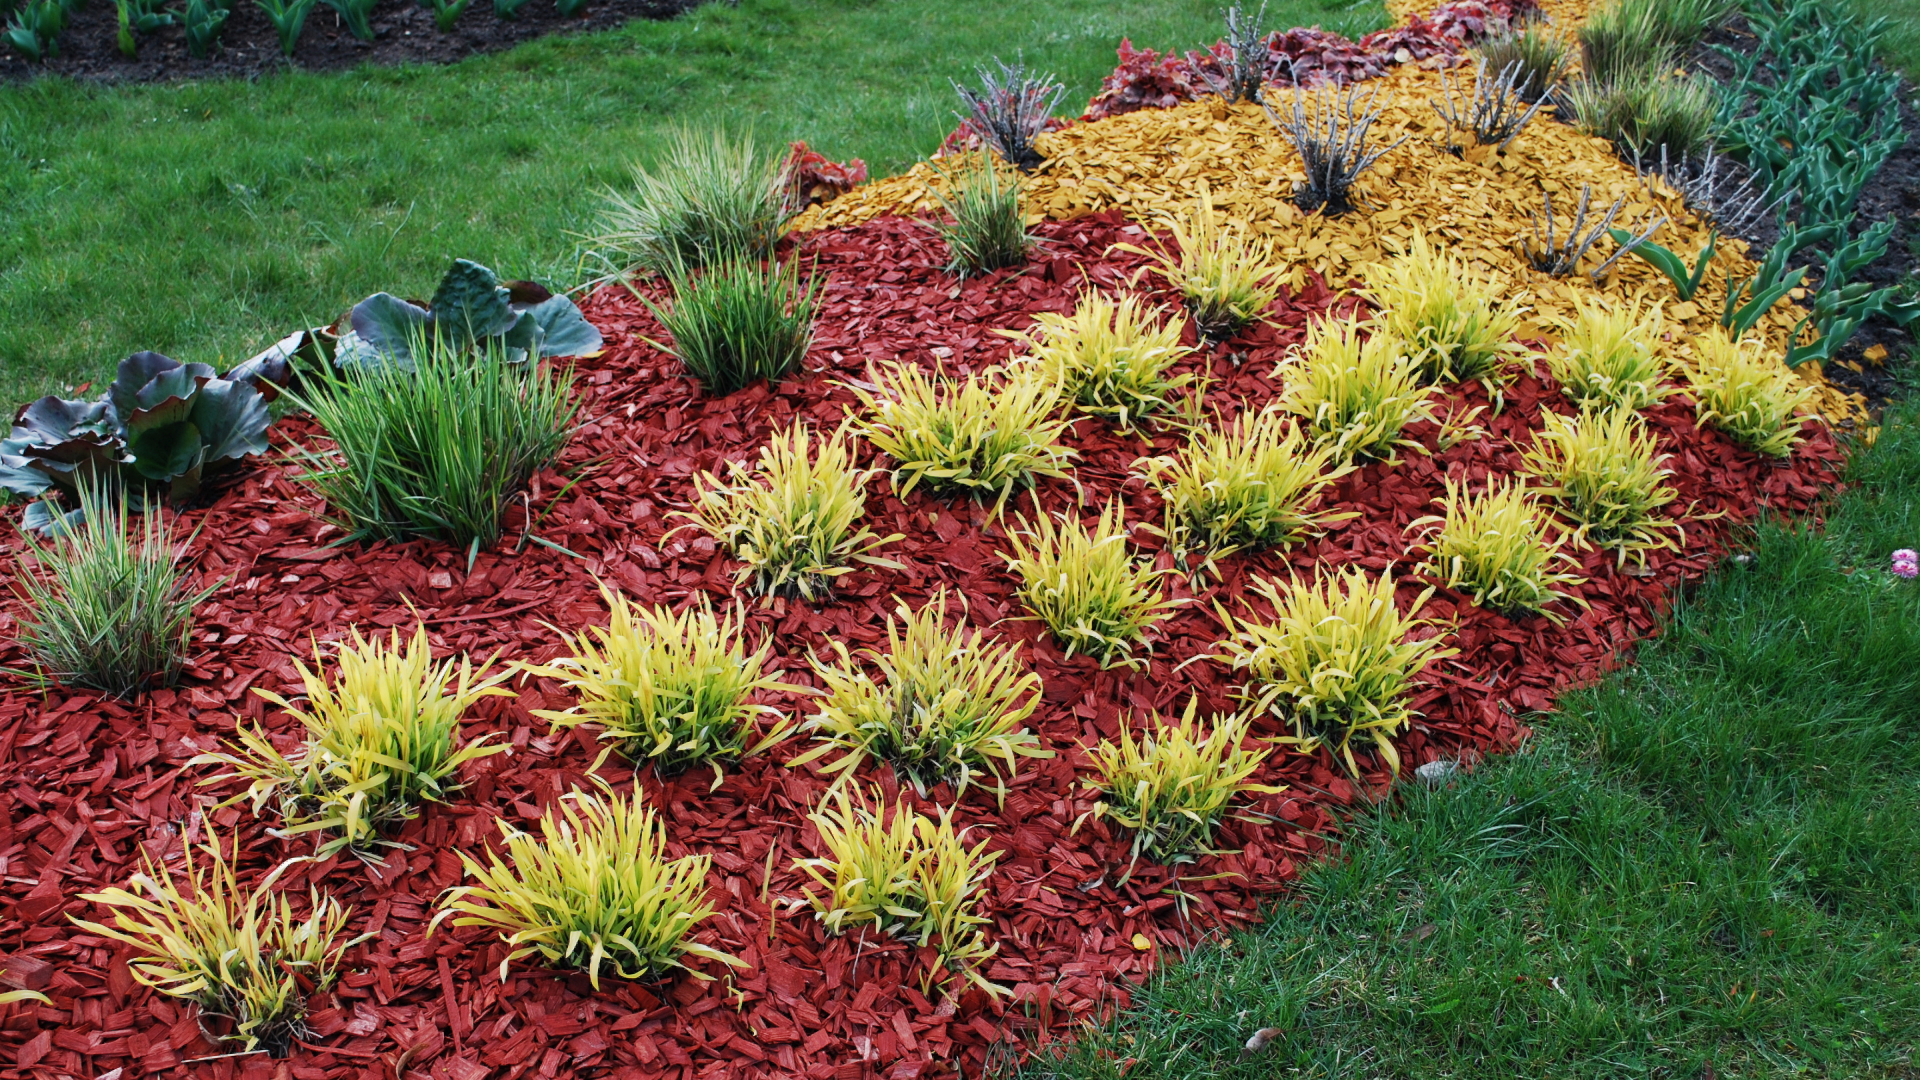 A mulched garden bed is the last step of winter garden maintenance